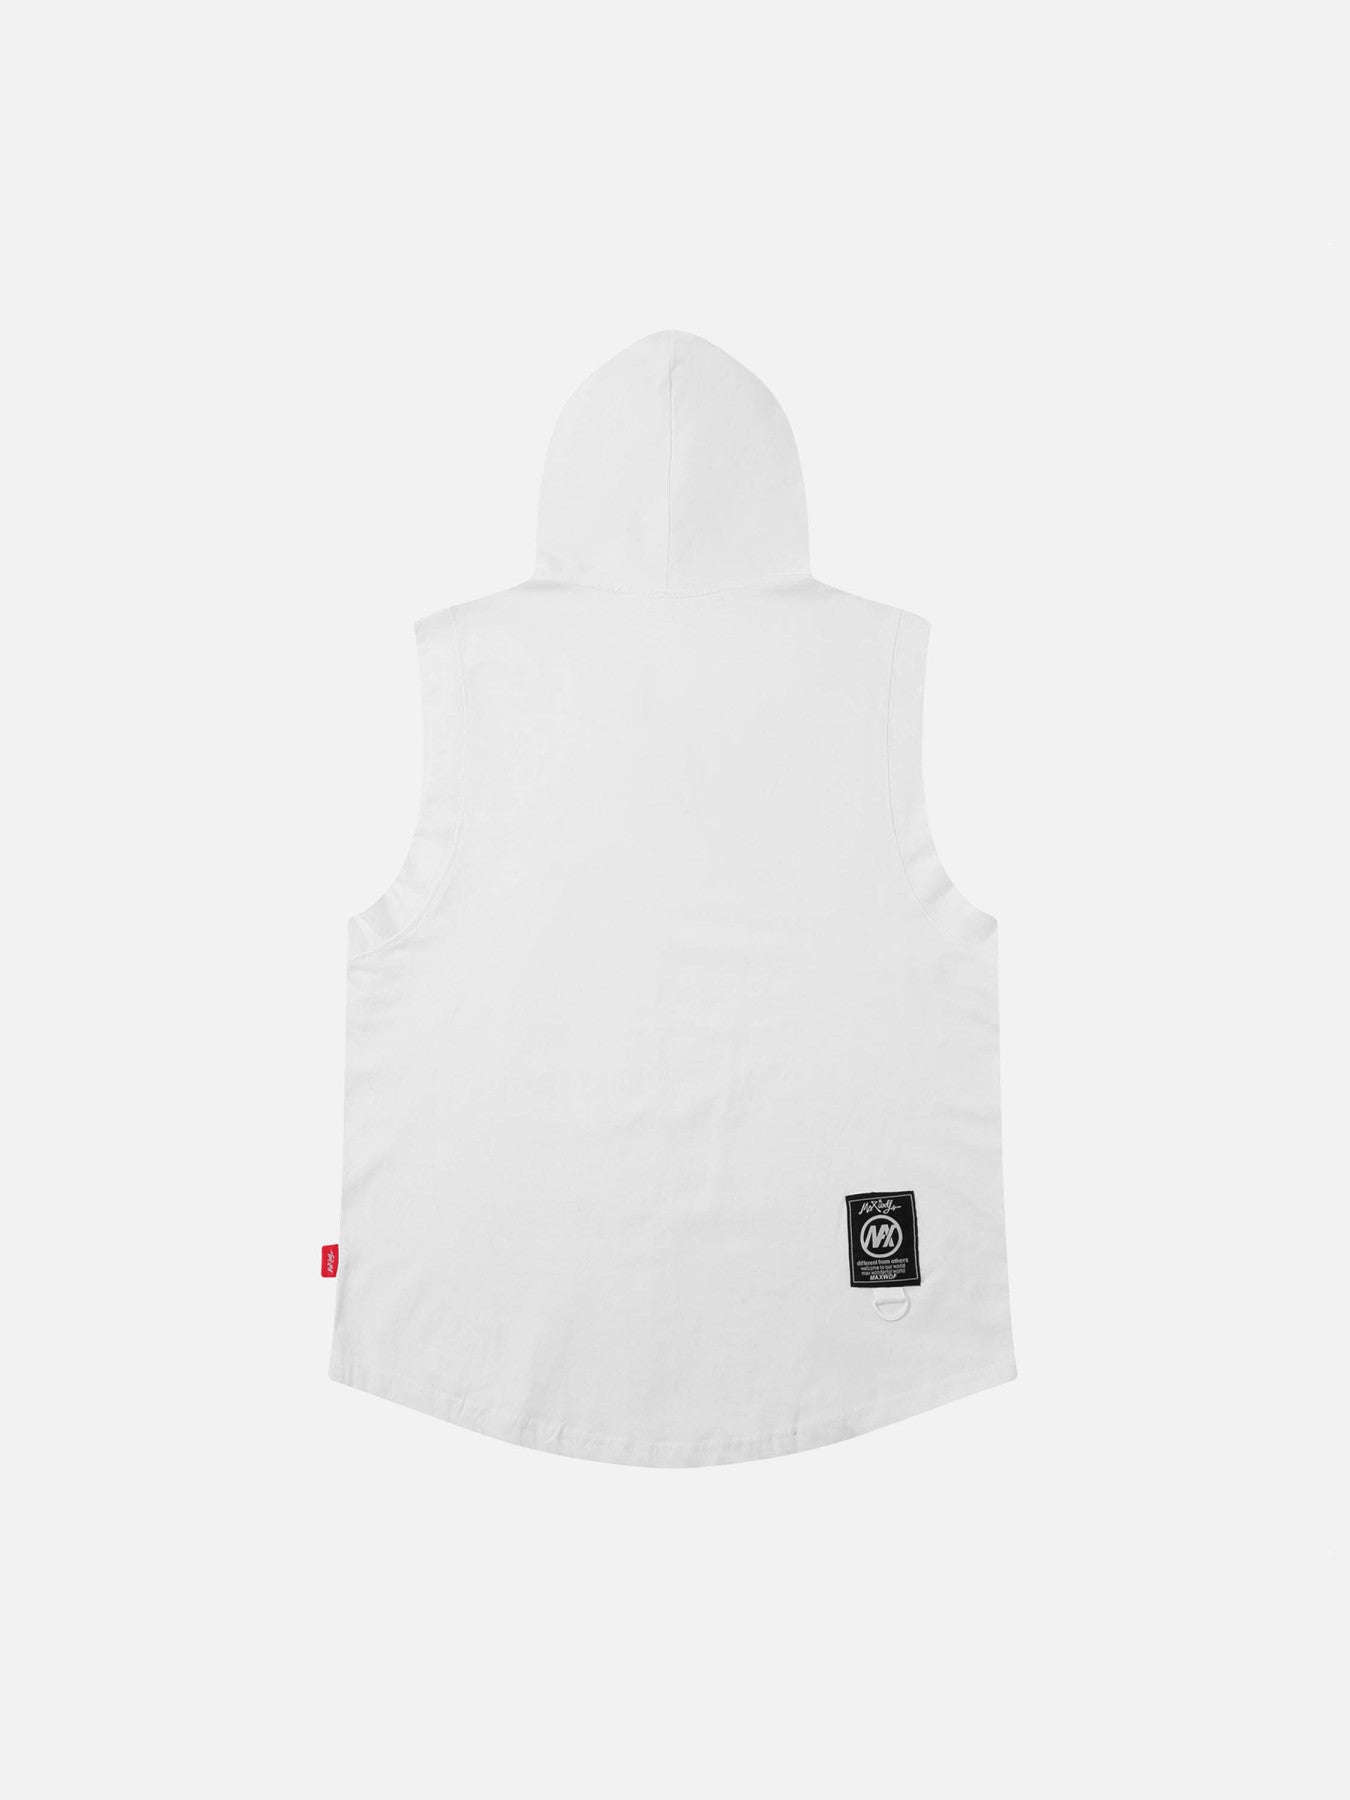 The Supermade American Style Hooded Printed Undershirt